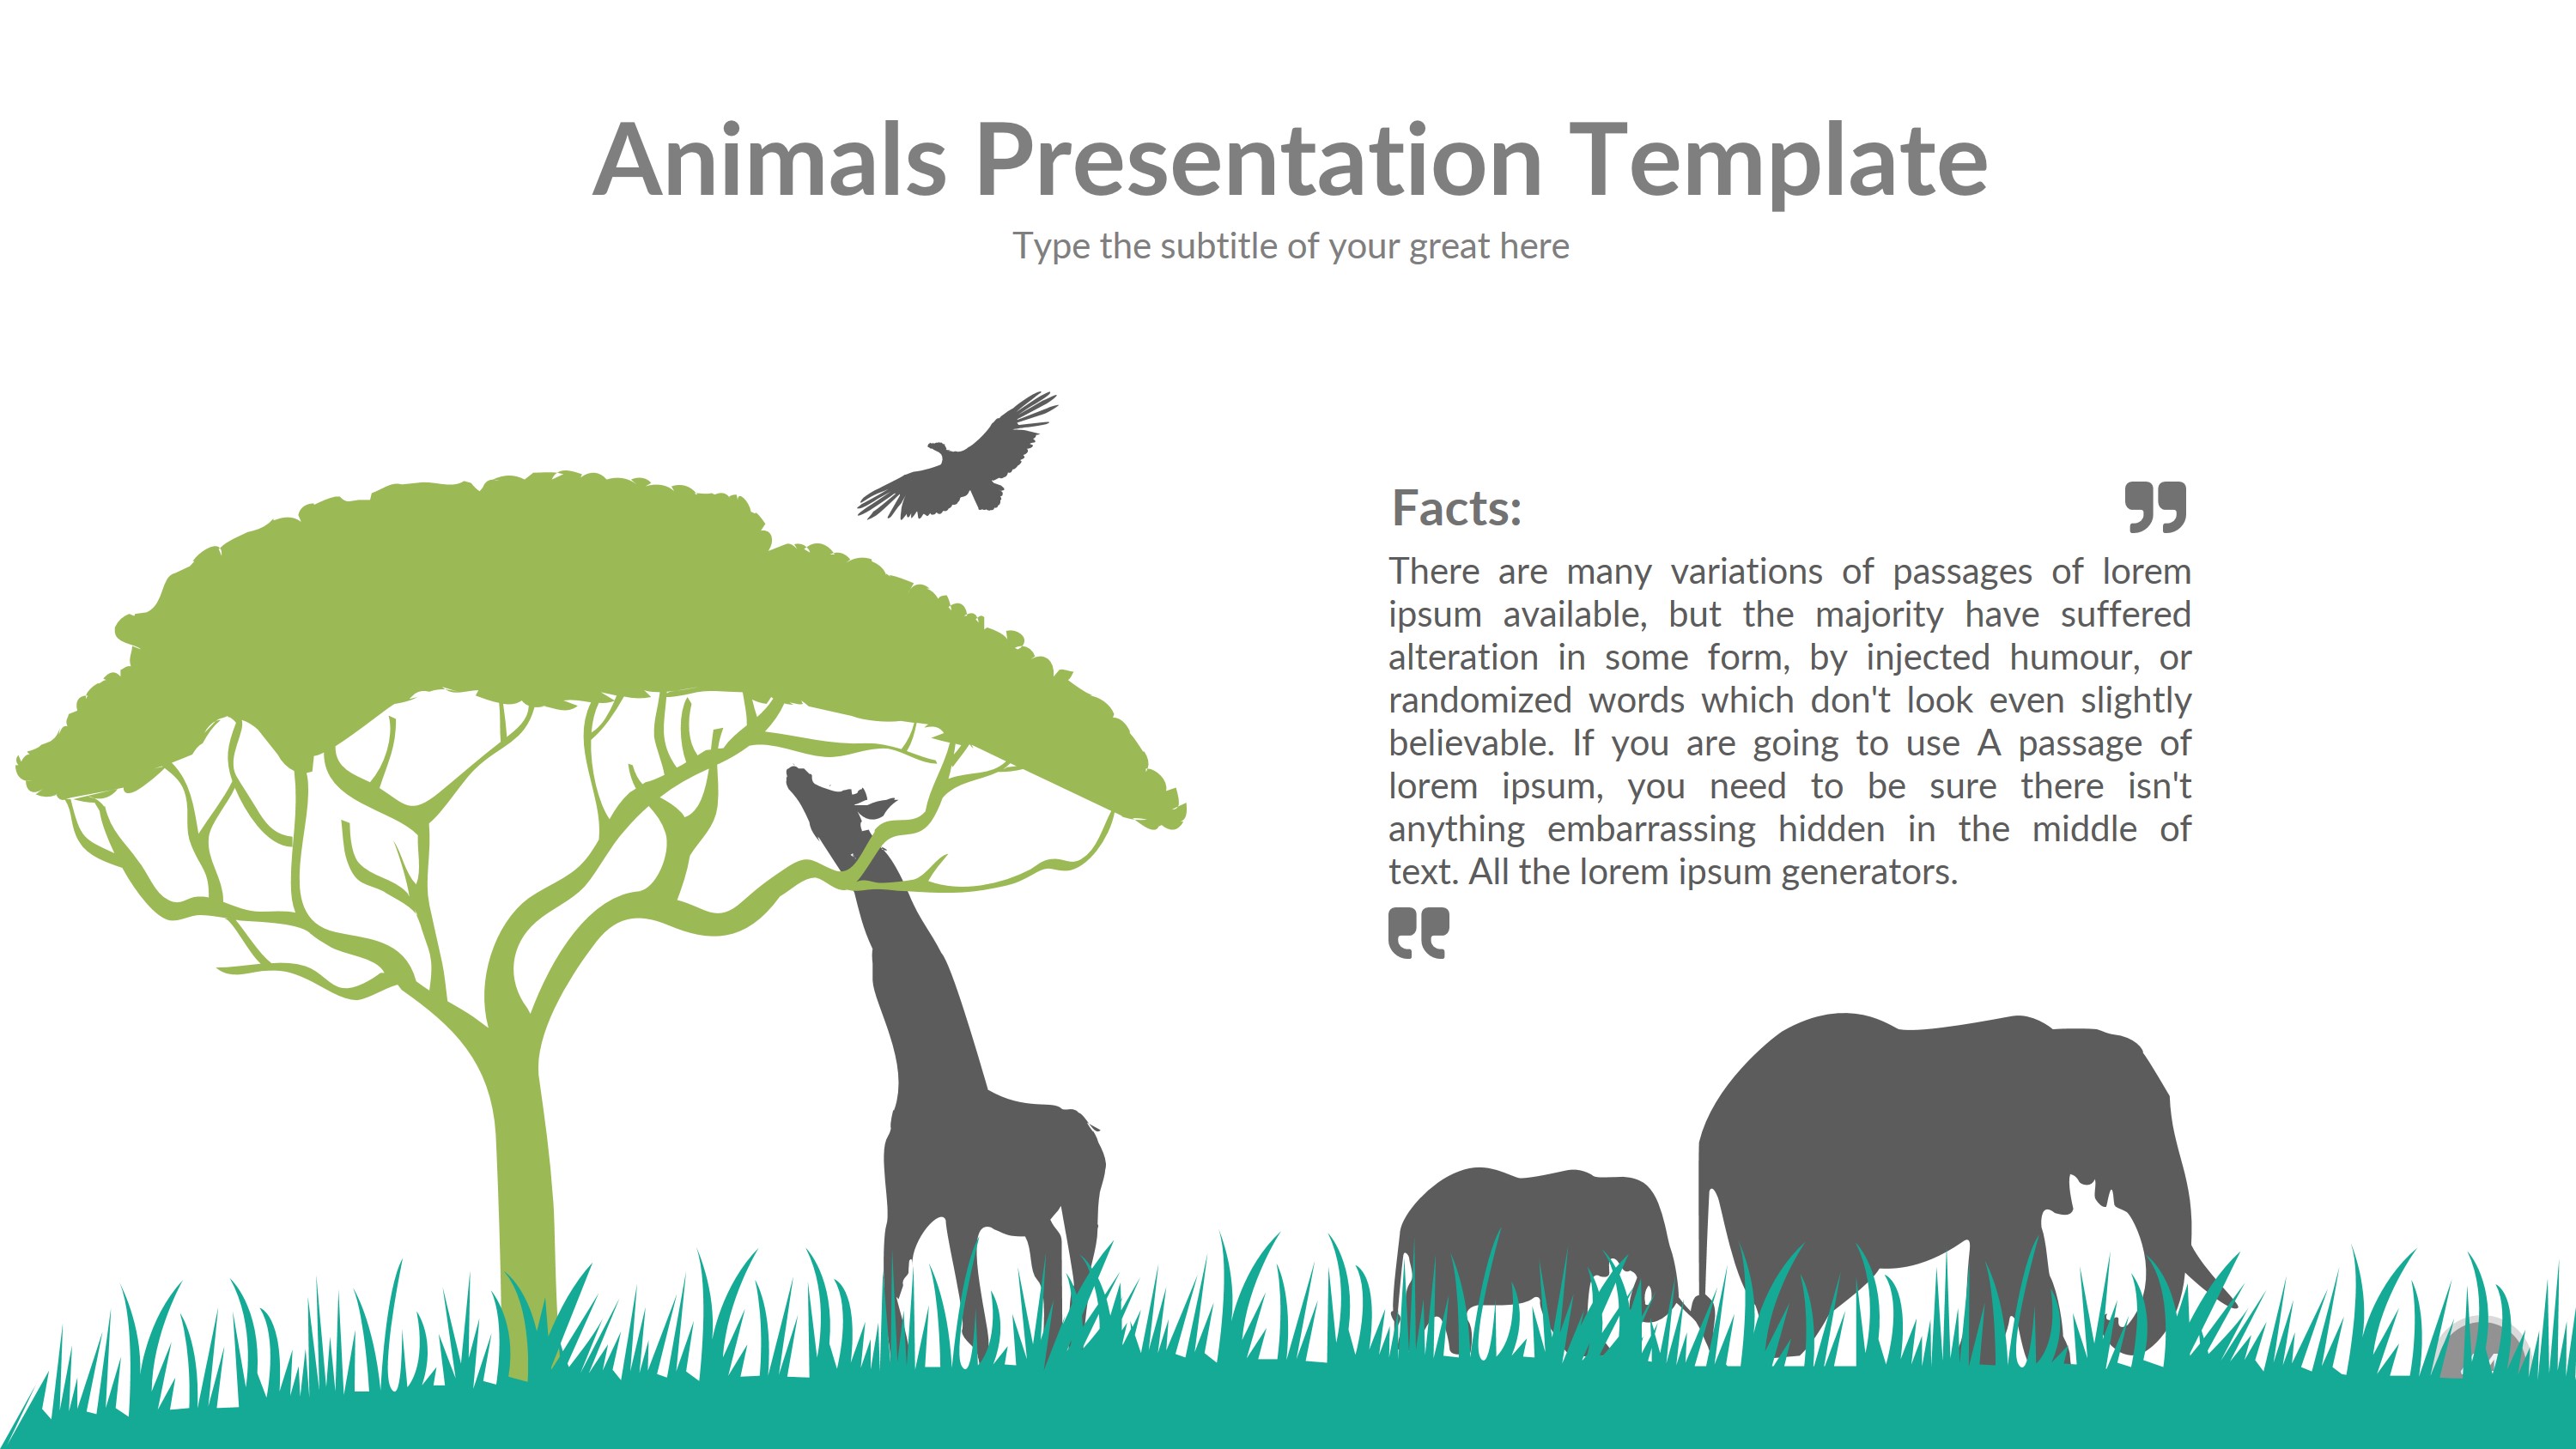 how to do a presentation on animals